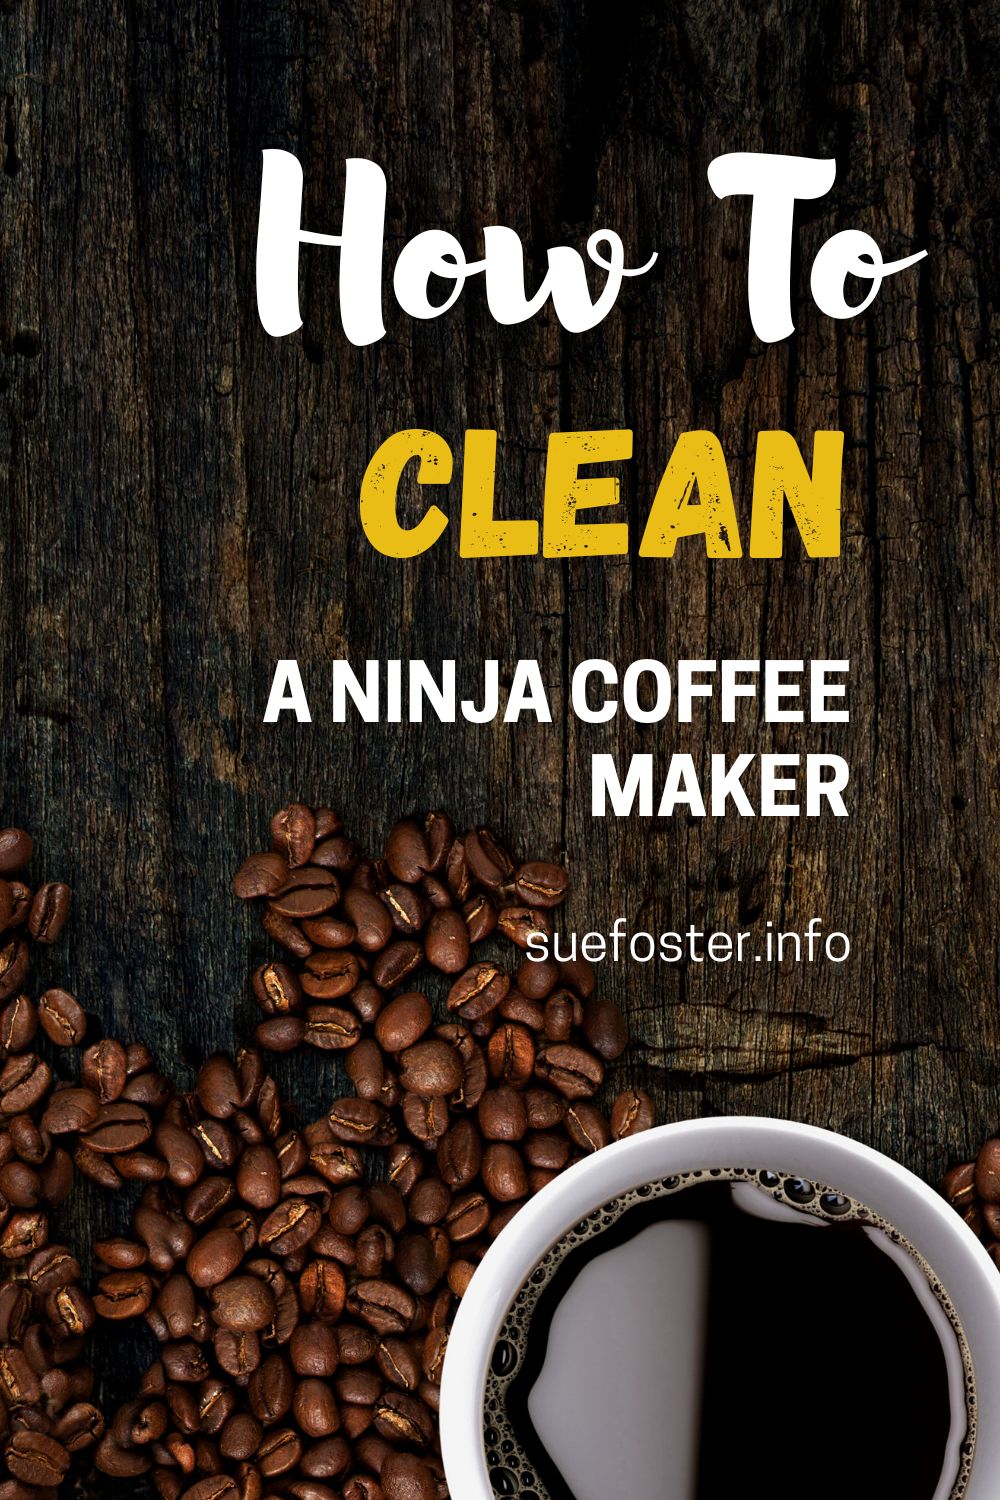 Discover how to keep your Ninja Coffee Maker running smoothly. Learn the best cleaning tips for a fresh brew every time.